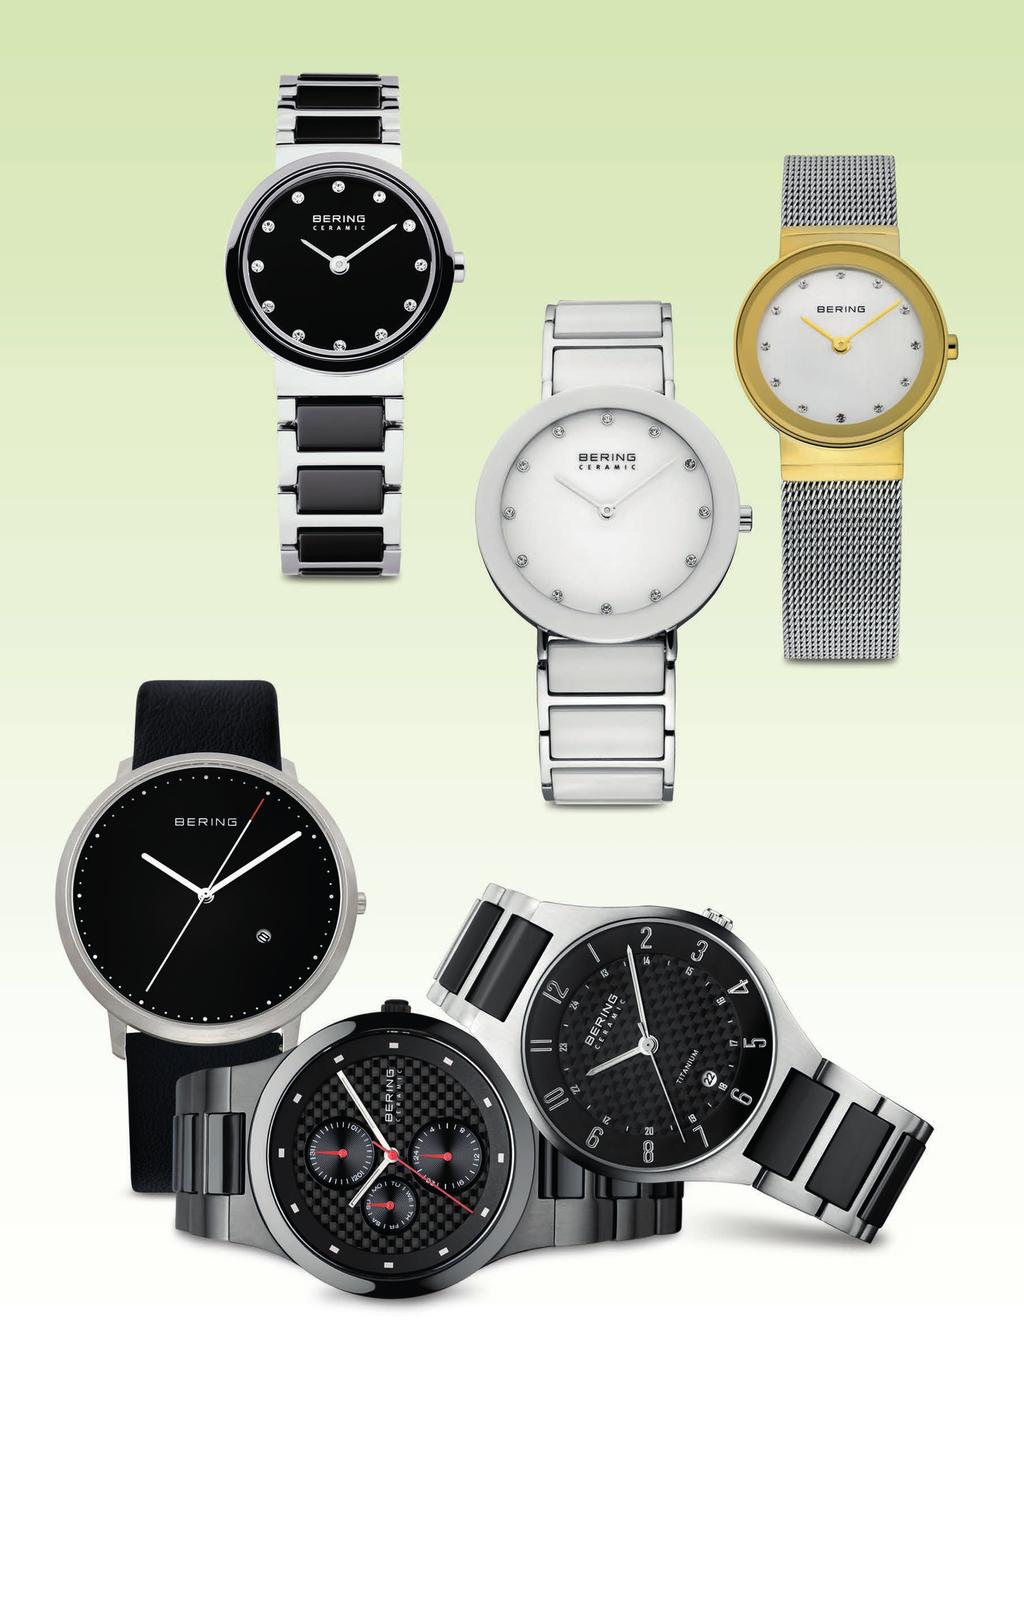 A A. Lady s stainless steel and black ceramic watch with black dial, $199. Lady s stainless steel and white ceramic watch, $199.